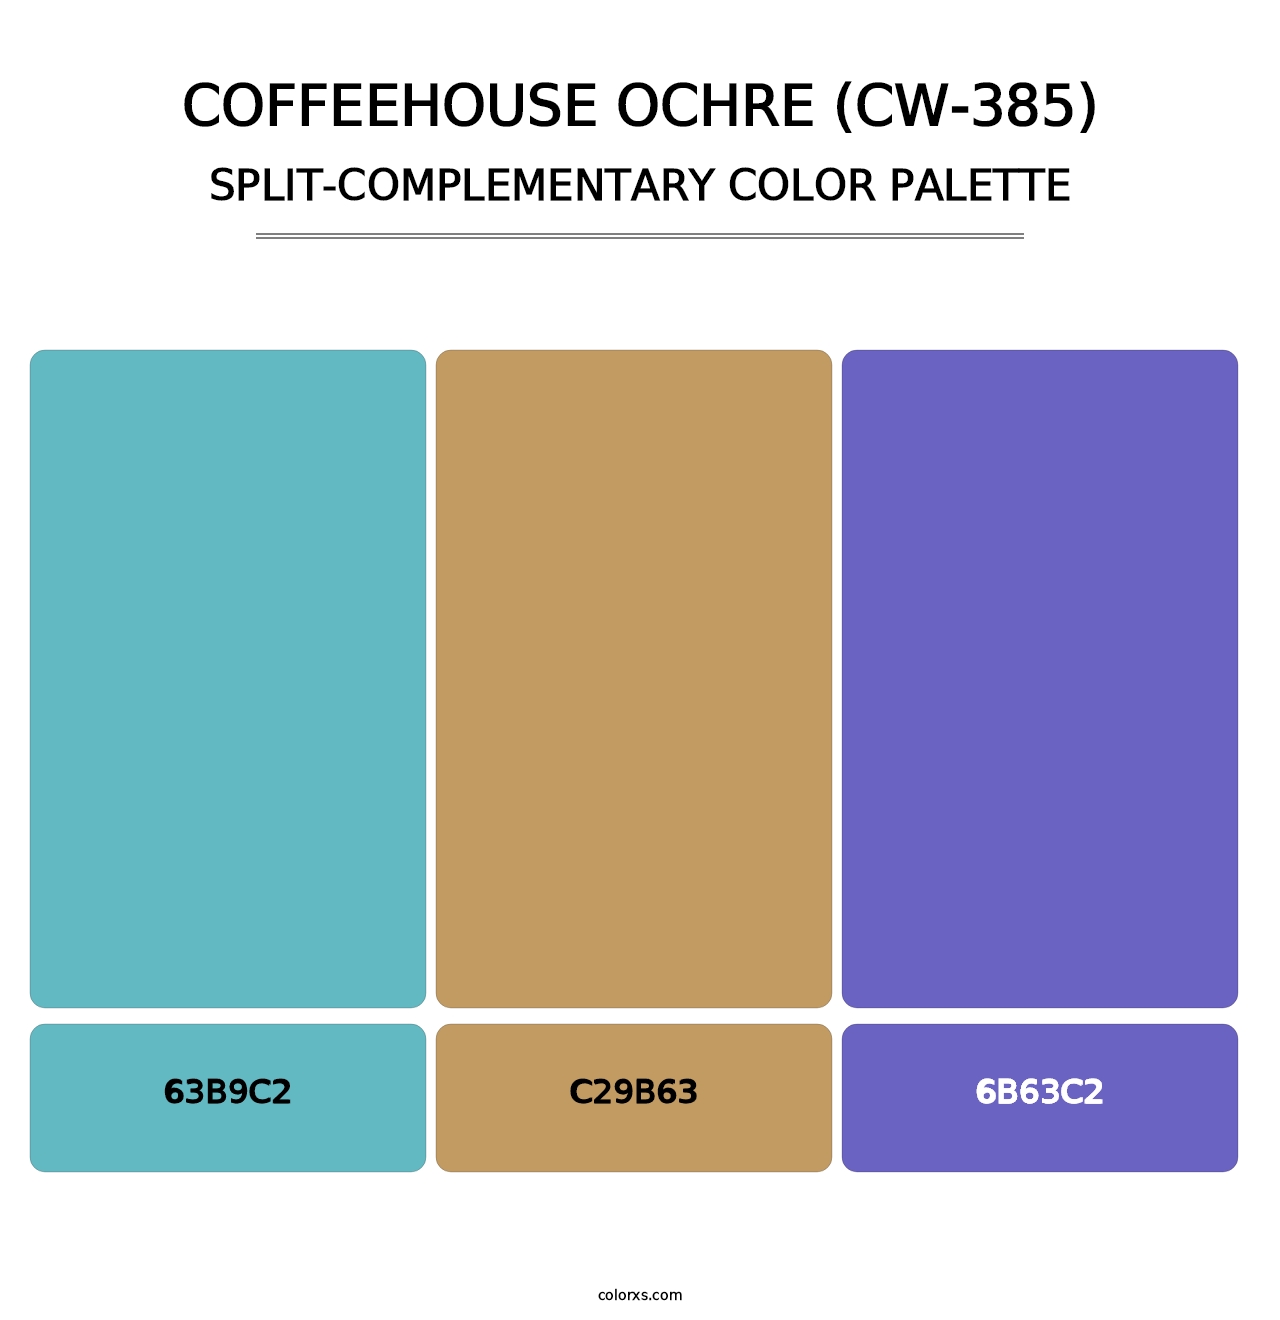 Coffeehouse Ochre (CW-385) - Split-Complementary Color Palette